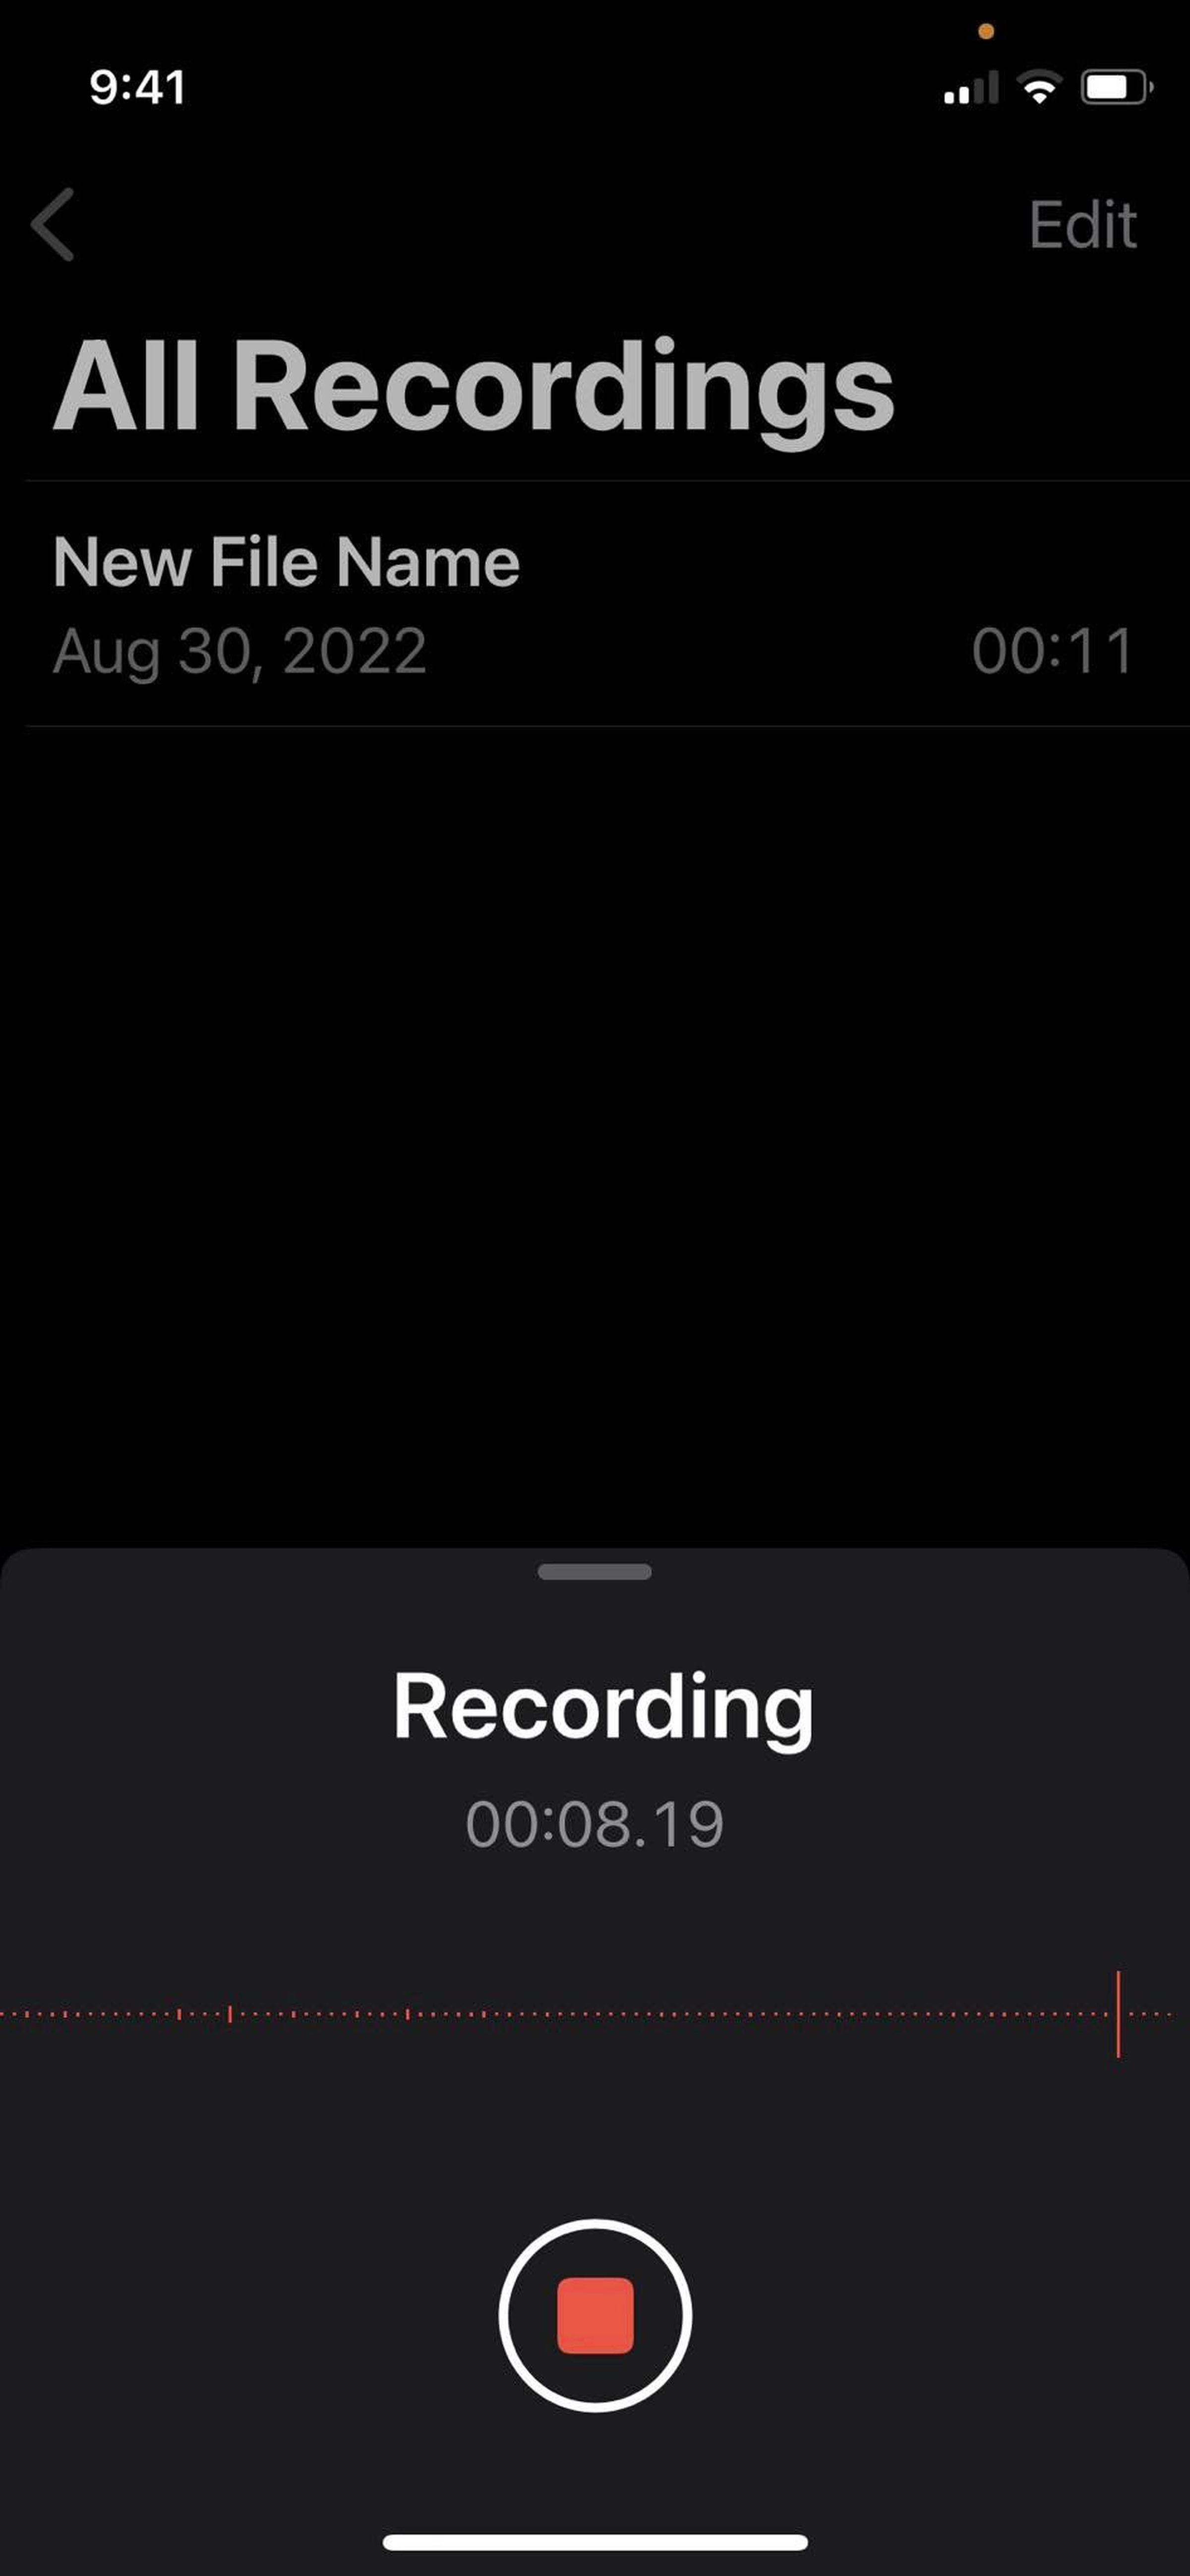 The Voice Memos app opened and recording a file.